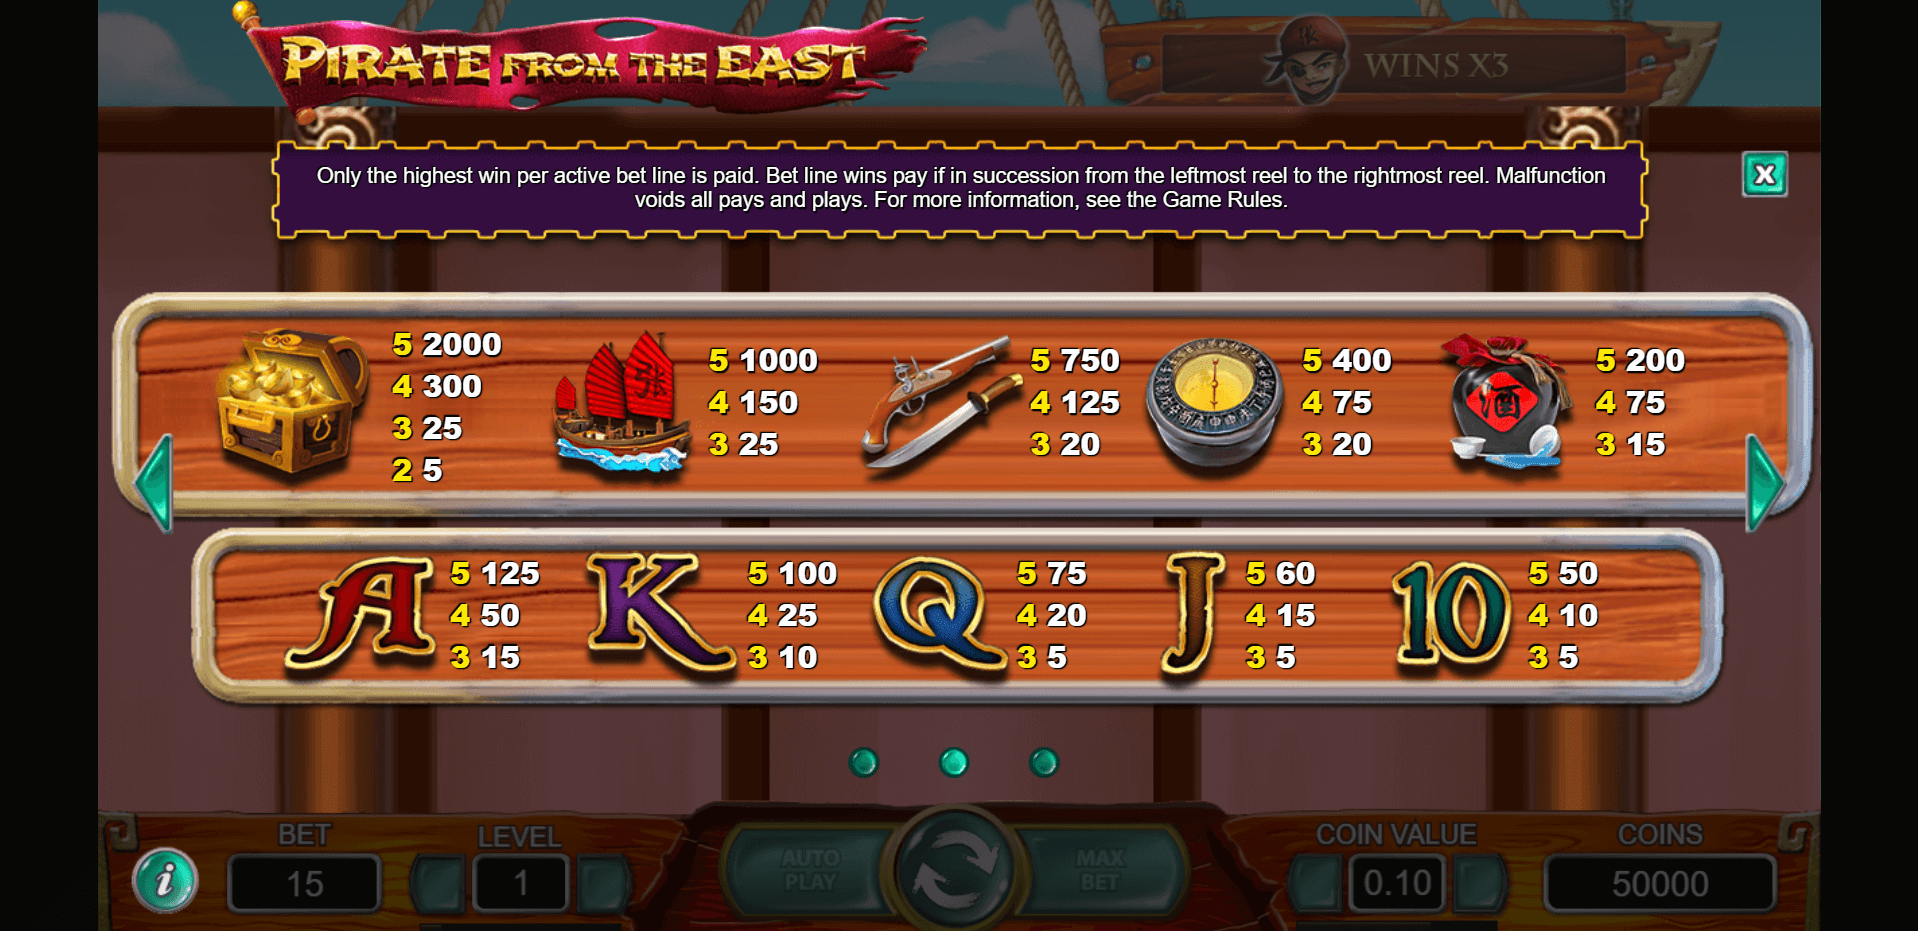 pirate from the east slot machine detail image 1